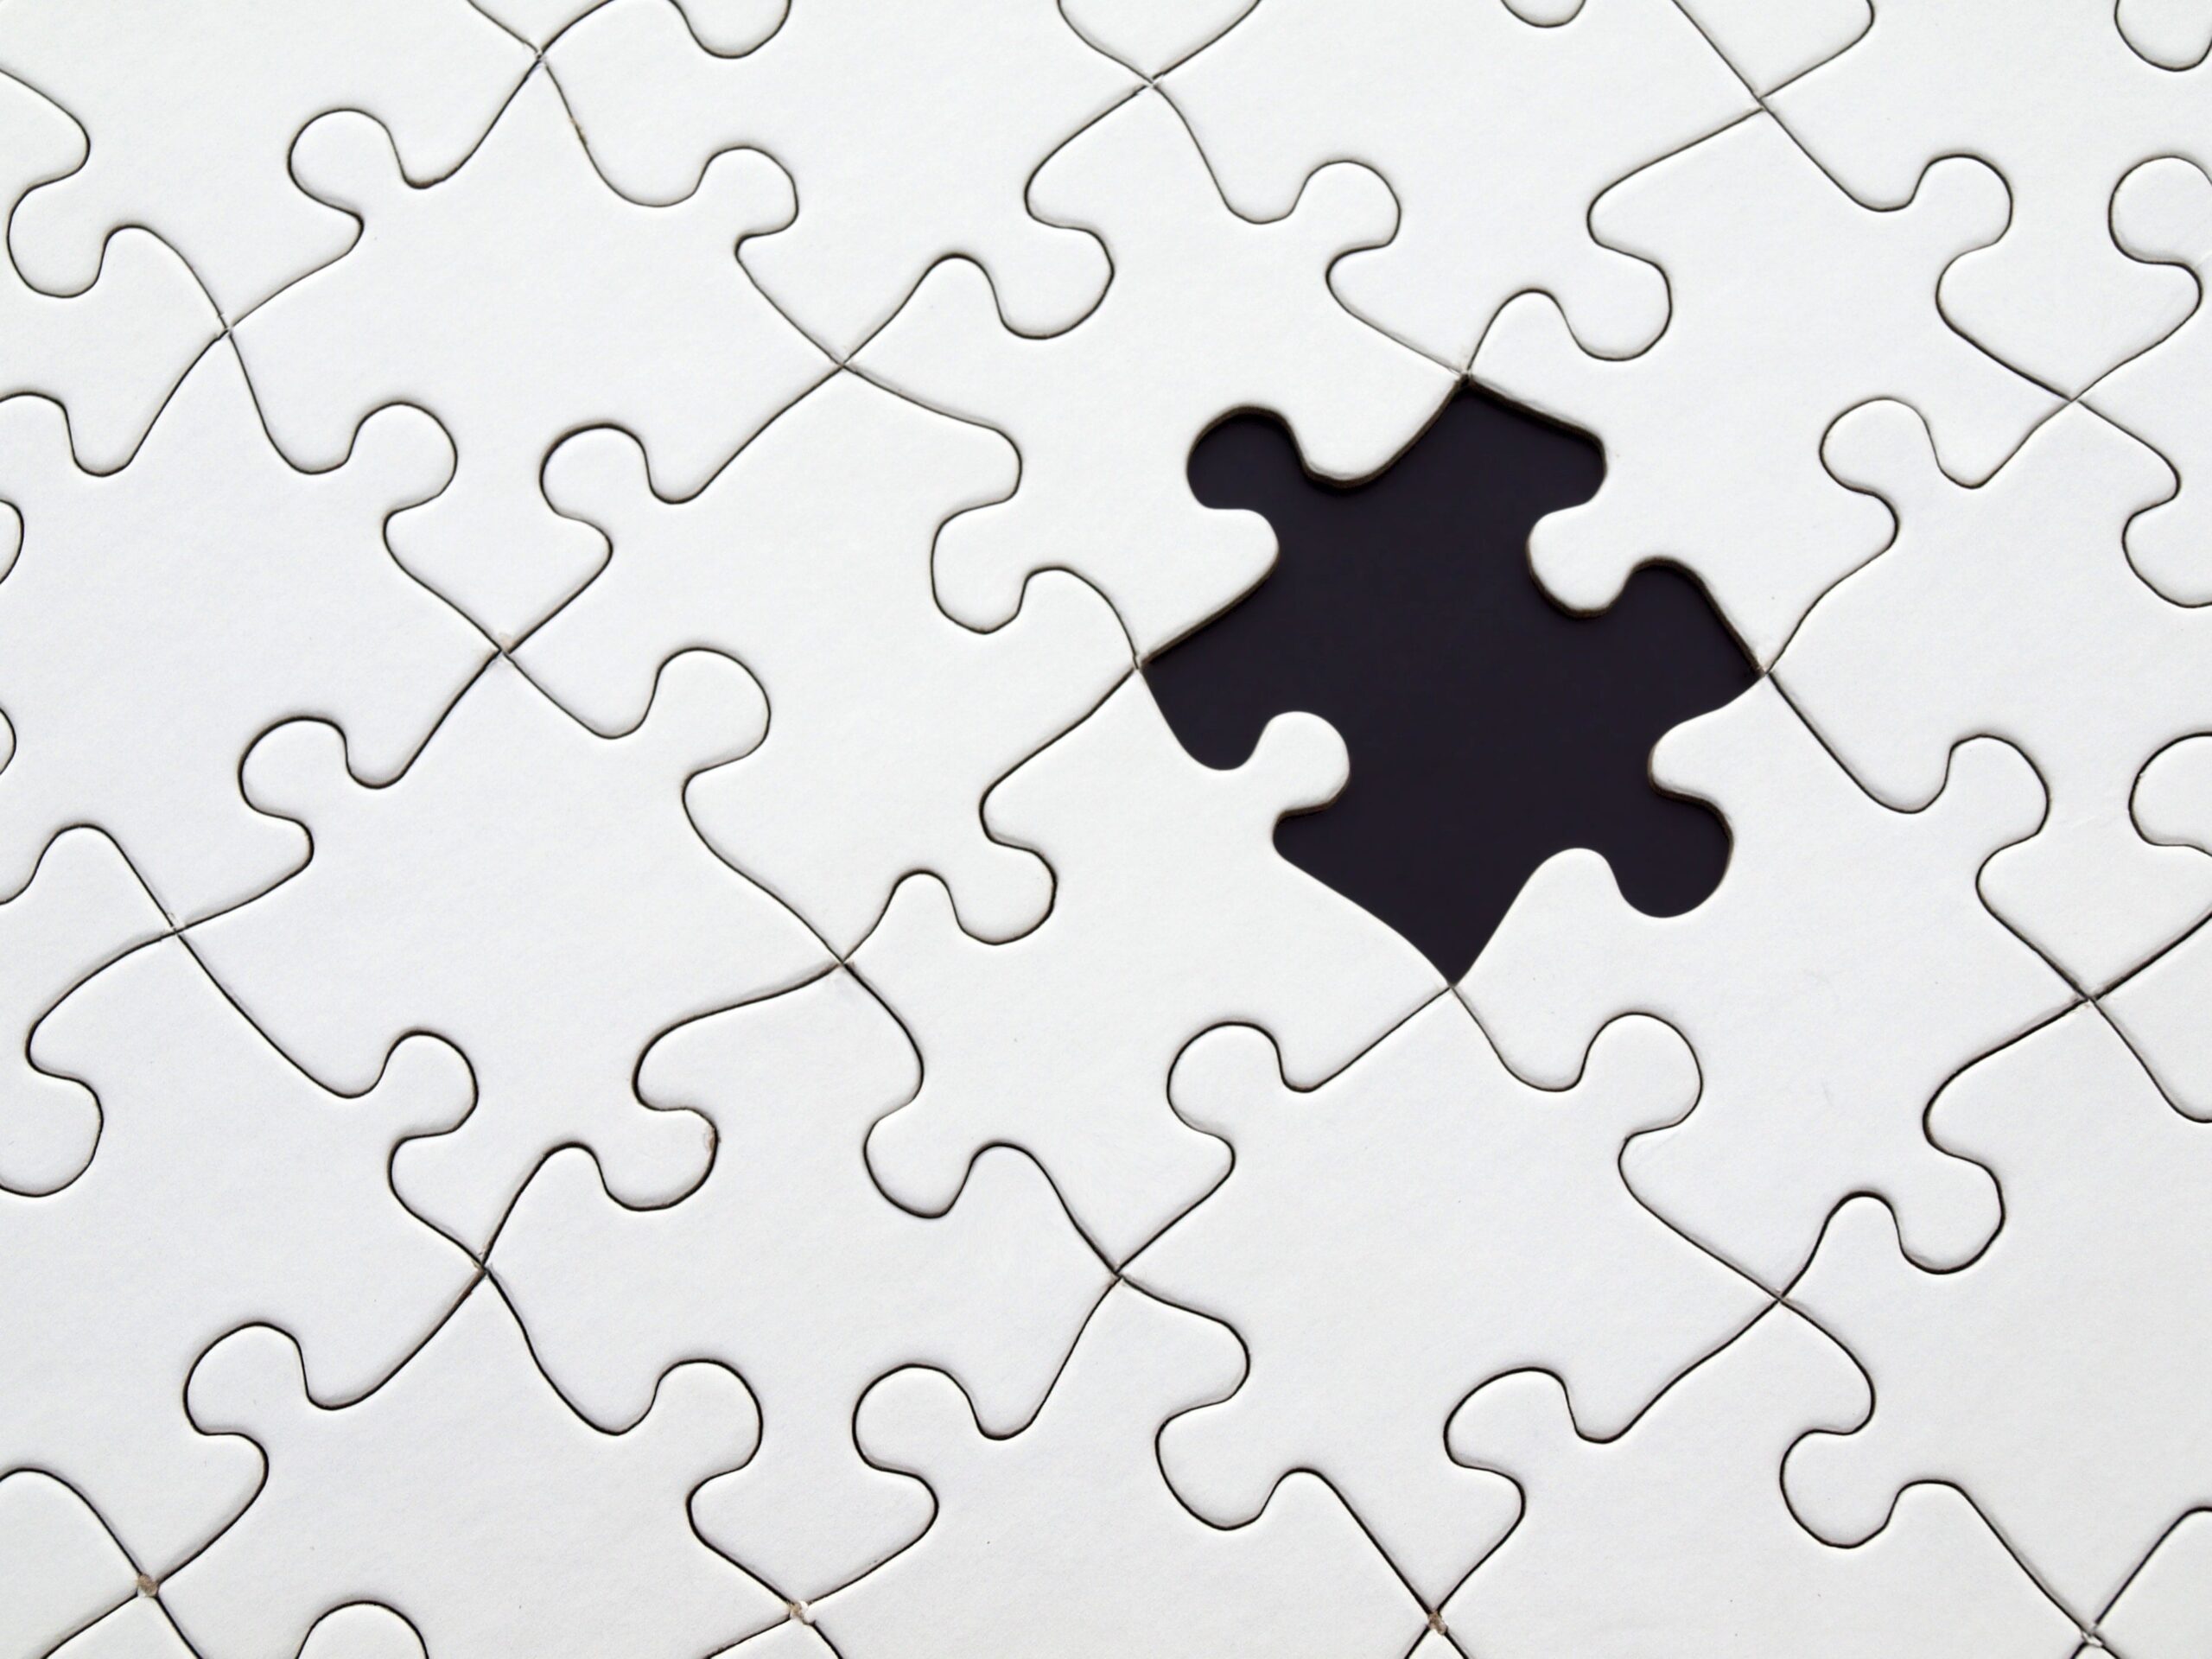 Solving the membership puzzle